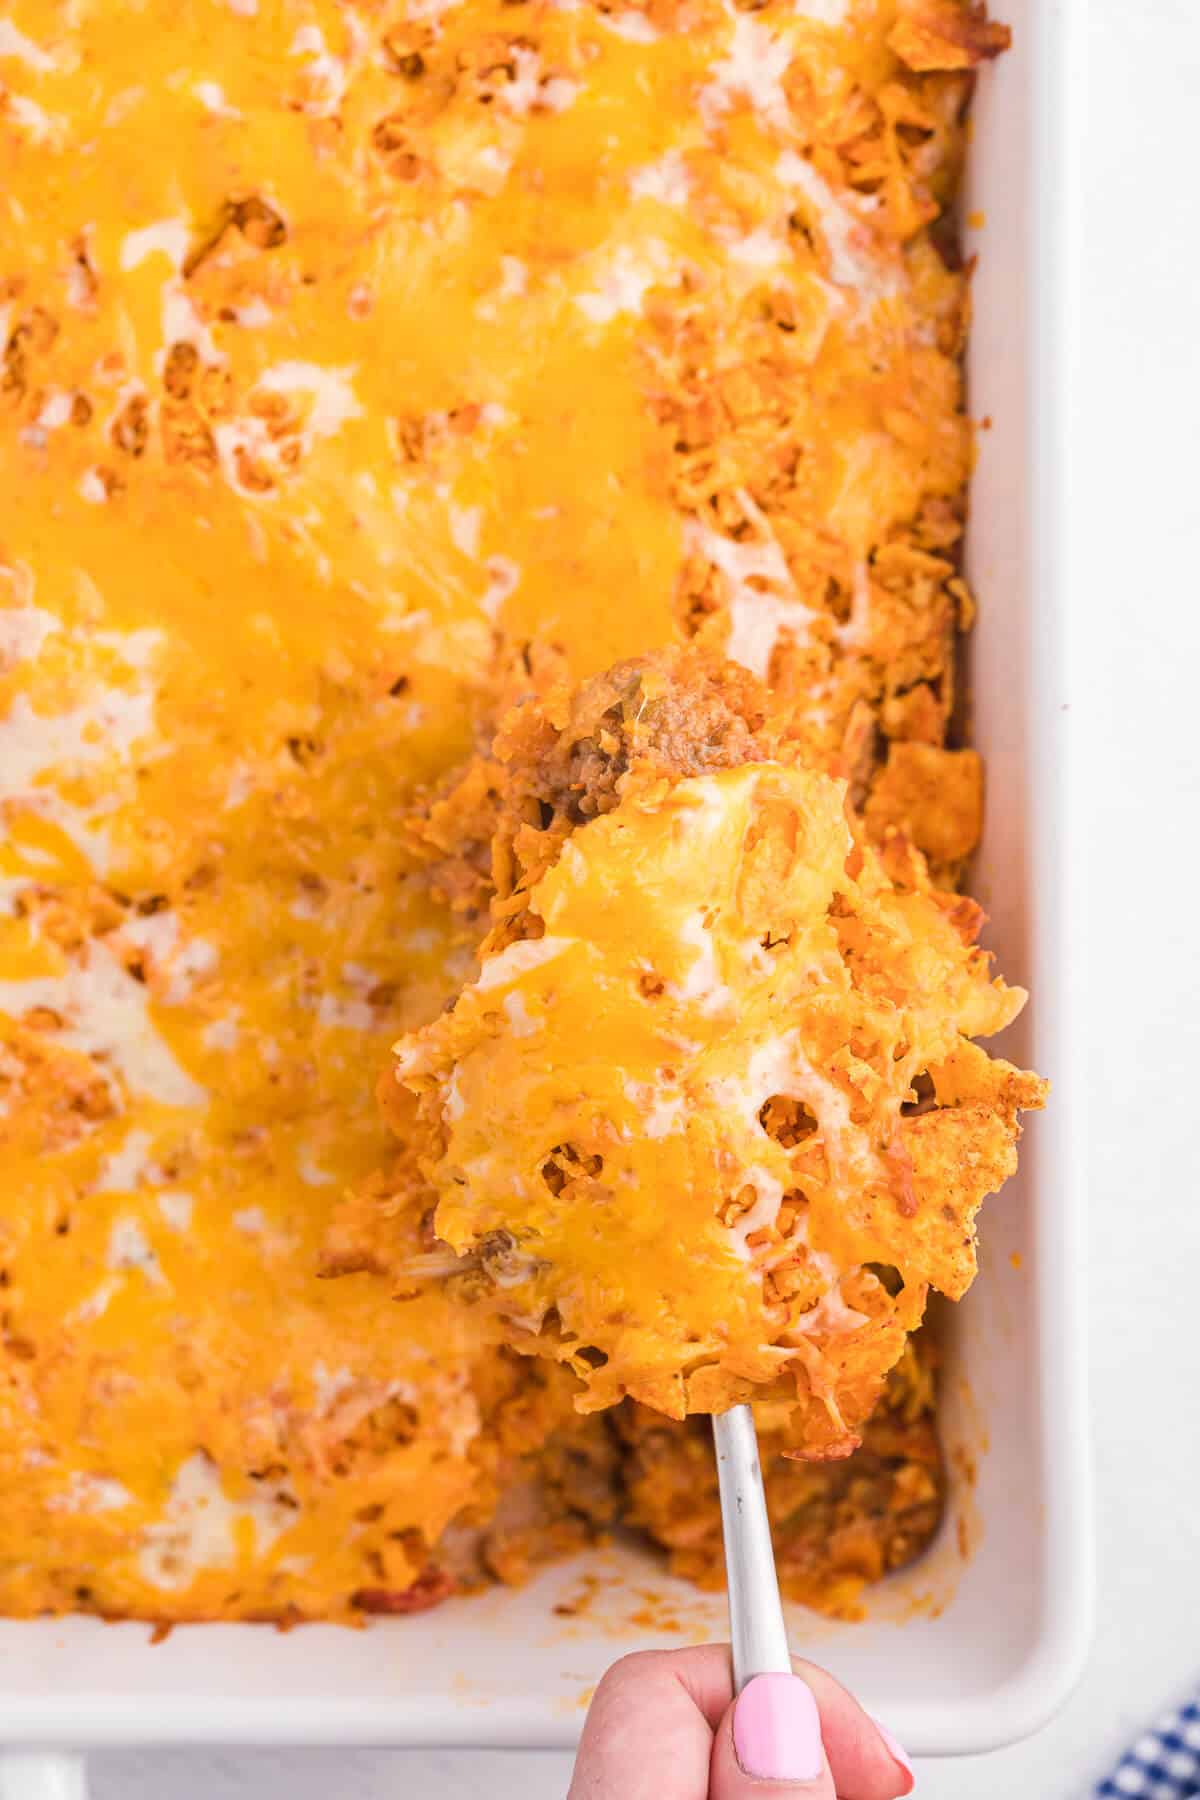 Doritos Casserole Recipe - Take Mexican night to a whole new level with this easy taco bake recipe. Made with ground beef, sour cream, spices and loads of cheese, it's zesty with hearty Tex Mex flavor. A yummy dinner recipe your family will love!